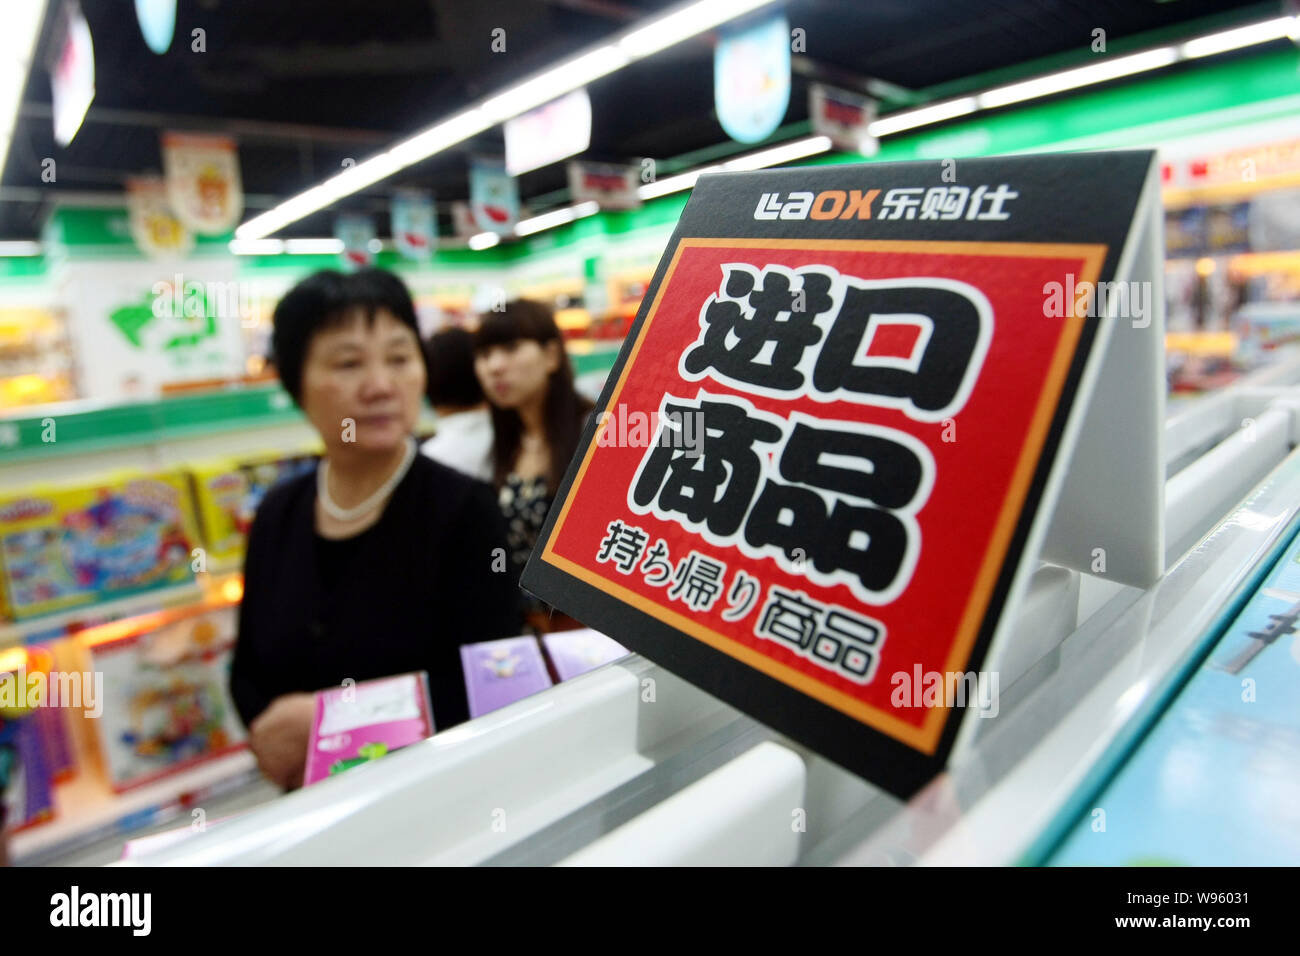 Customers are shopping at the Laox flaship store in Shanghai, China, 25 May 2012.   Japanese electronics retailer Laox, whose majority shareholder is Stock Photo